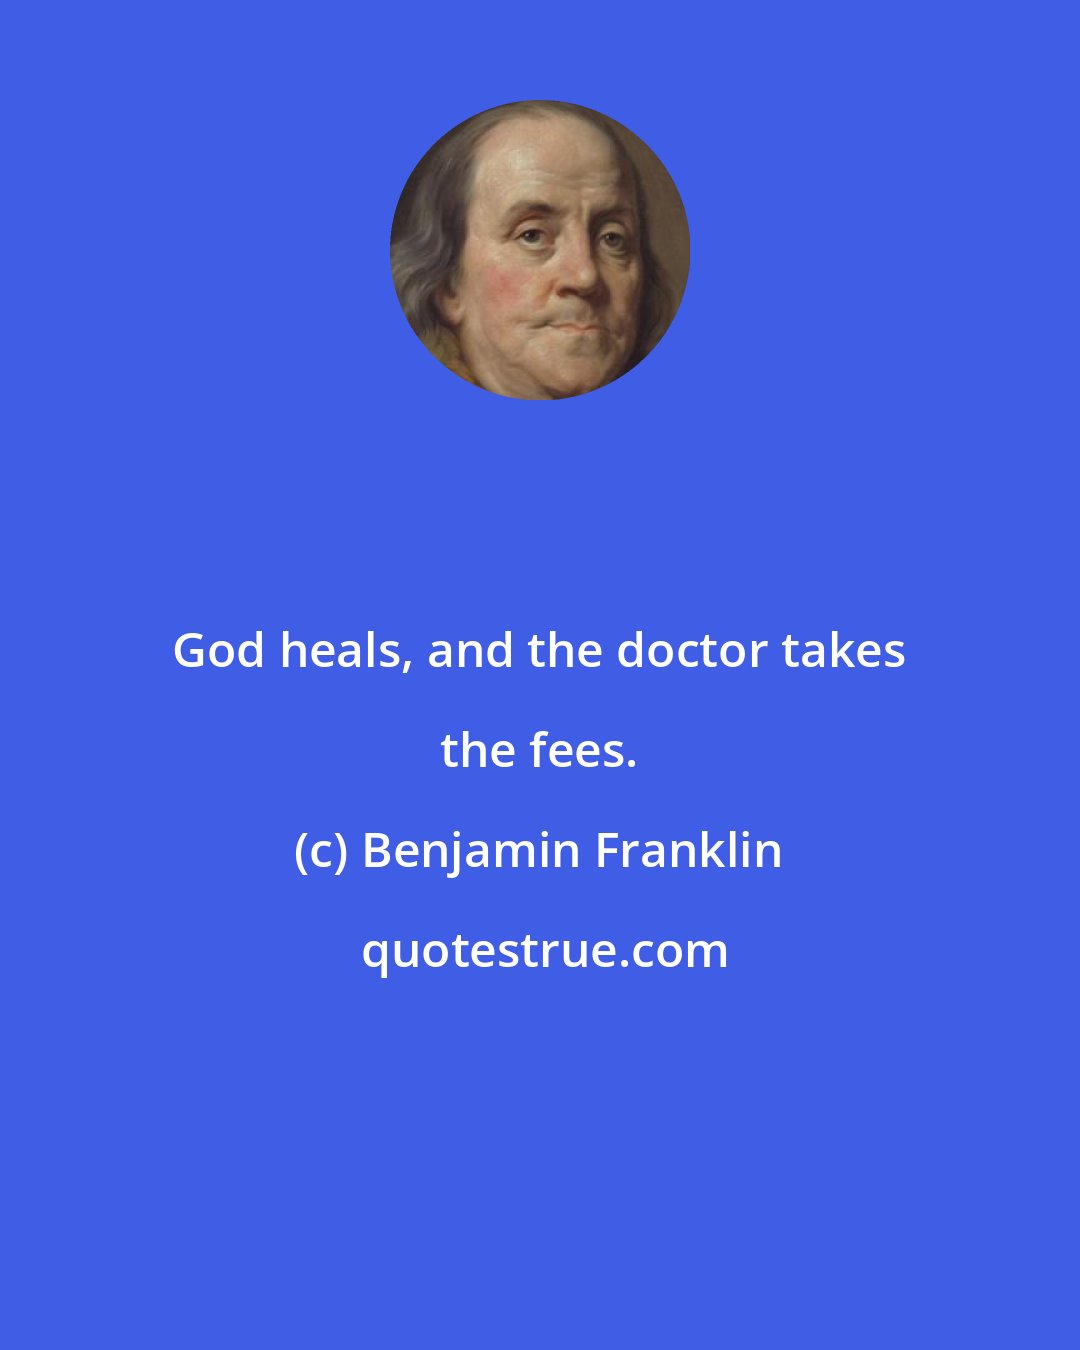 Benjamin Franklin: God heals, and the doctor takes the fees.